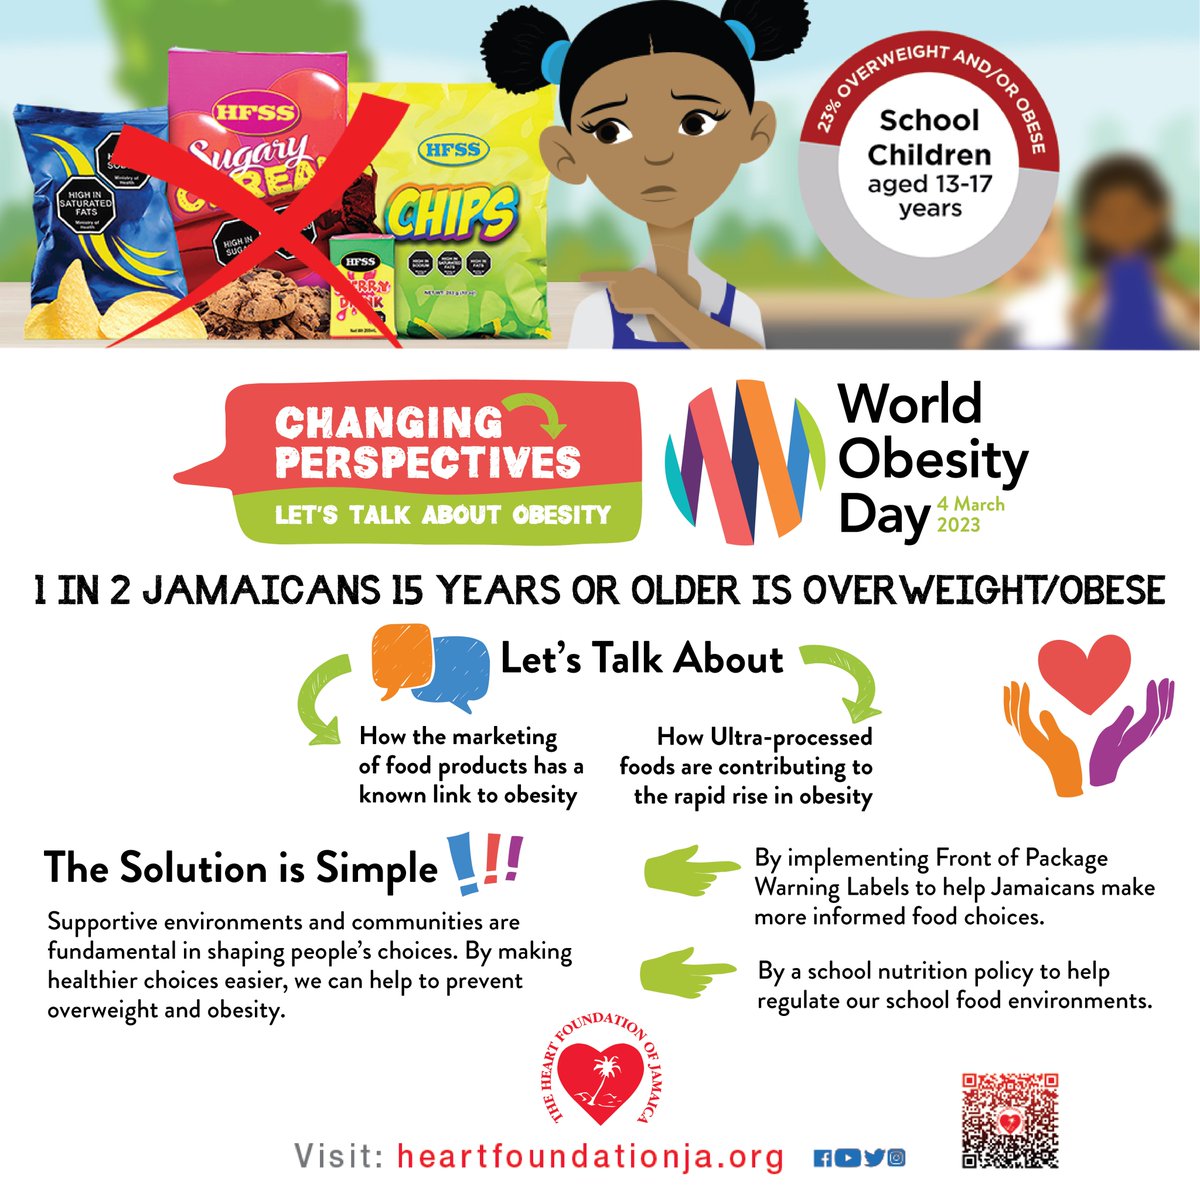 The pillars of World Obesity Day underpin the need for ongoing conversations about obesity, the need for collective action and the role everyone can play in reducing obesity in Jamaica.
#WorldObesityDay #ChangingPerspectives
#LetsTalkAboutObesity #WOD2023